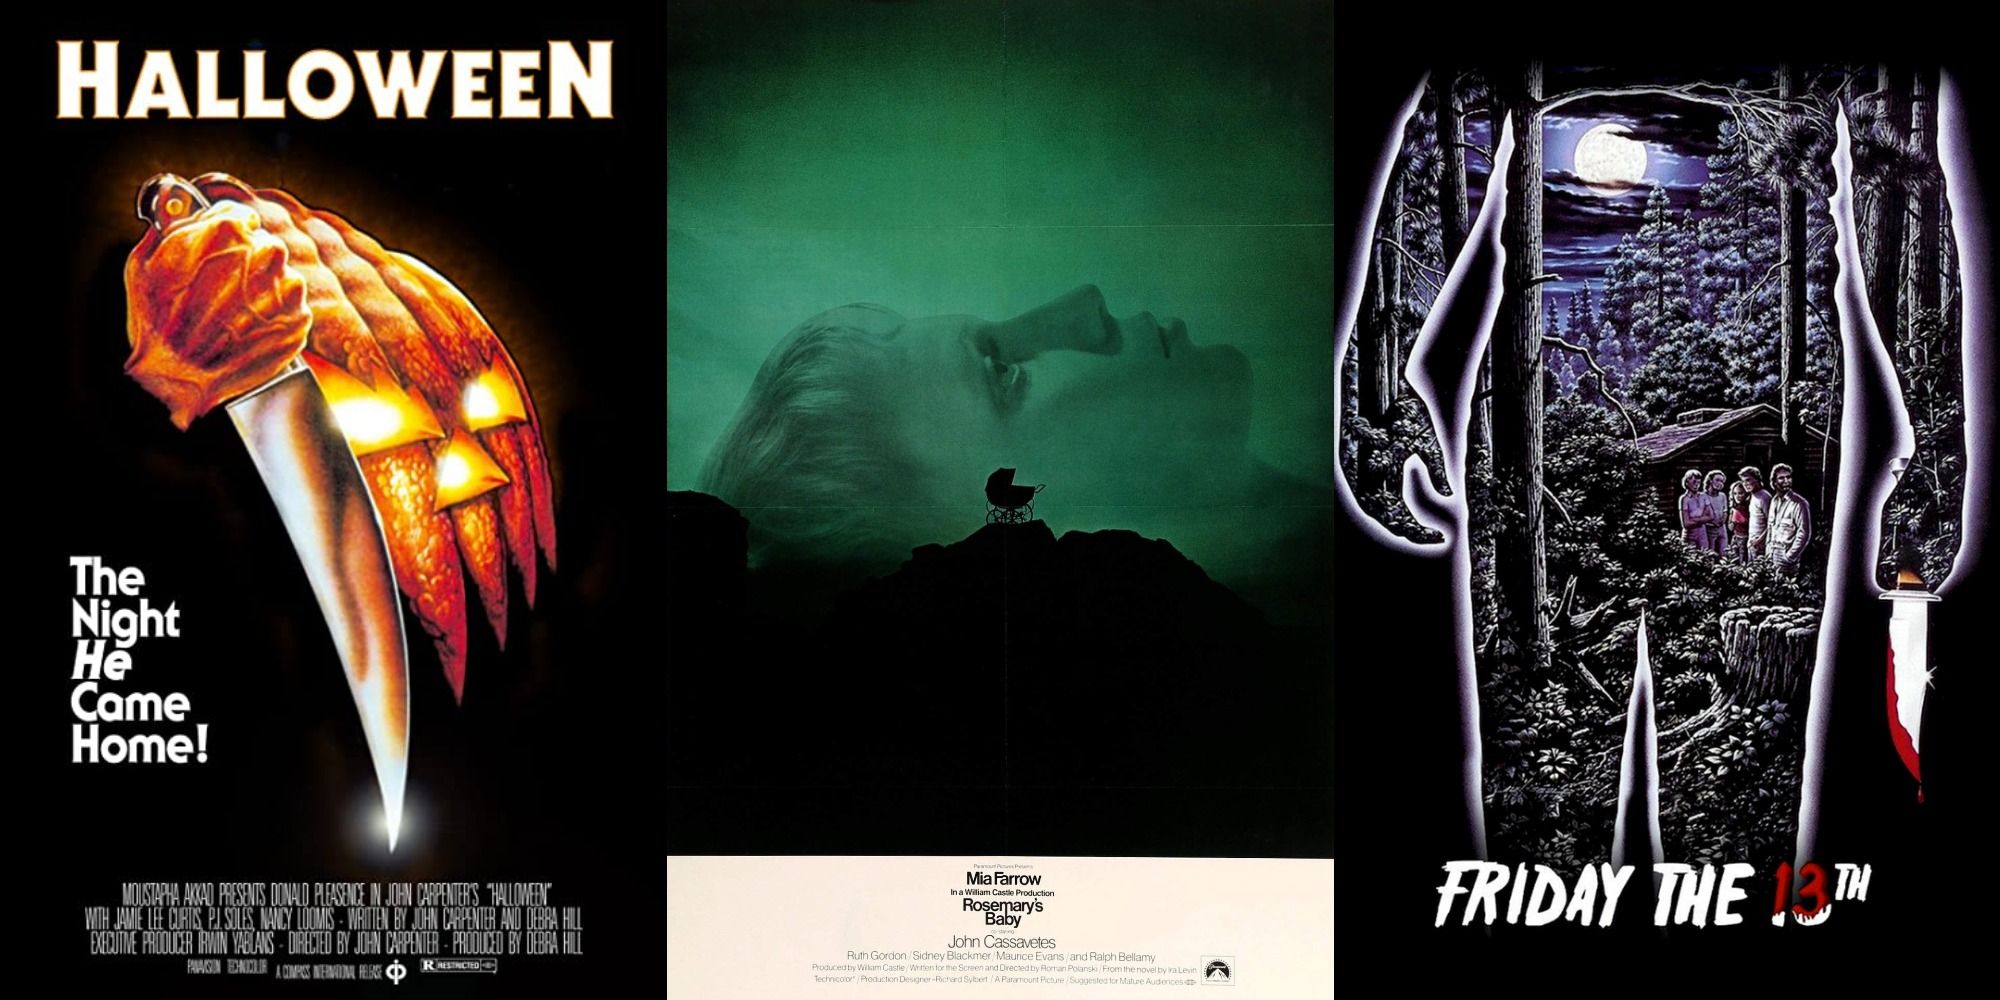 hollywood horror movies posters